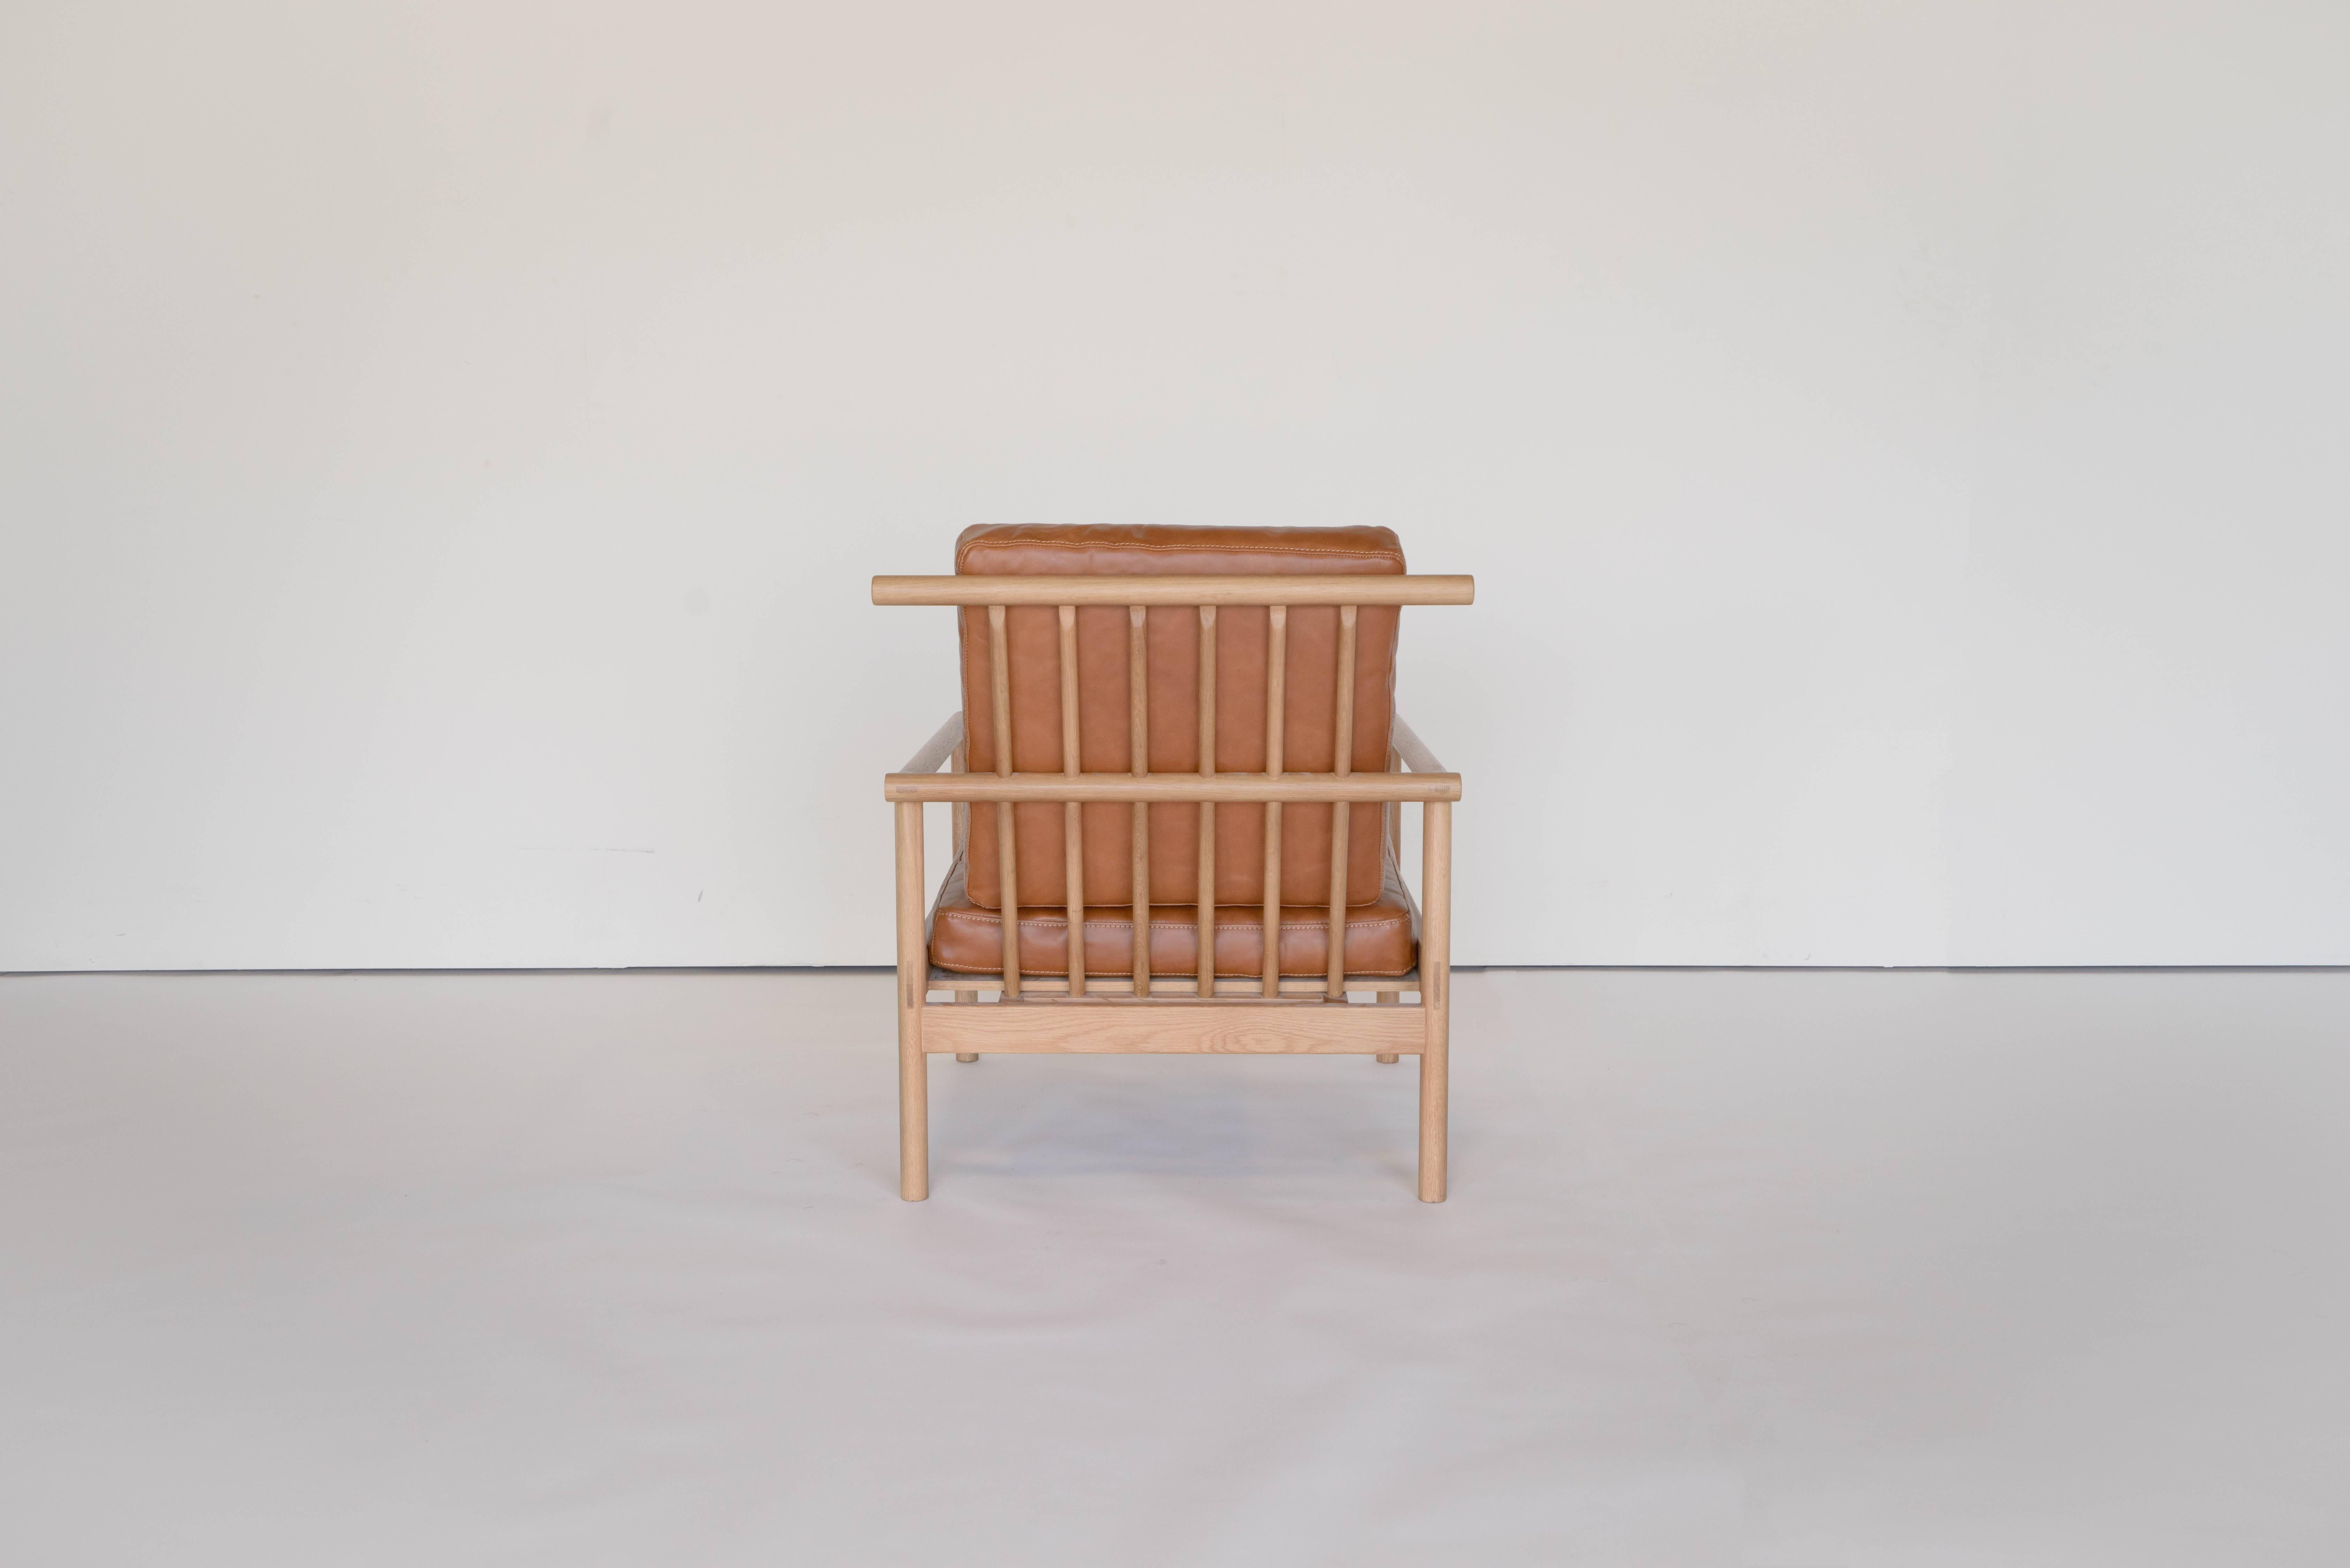 Sun at Six is a contemporary furniture design studio that works with traditional Chinese joinery masters to handcraft our pieces using traditional joinery. Vegetable tanned leather will patina with age. Exposed joinery throughout.

Great furniture